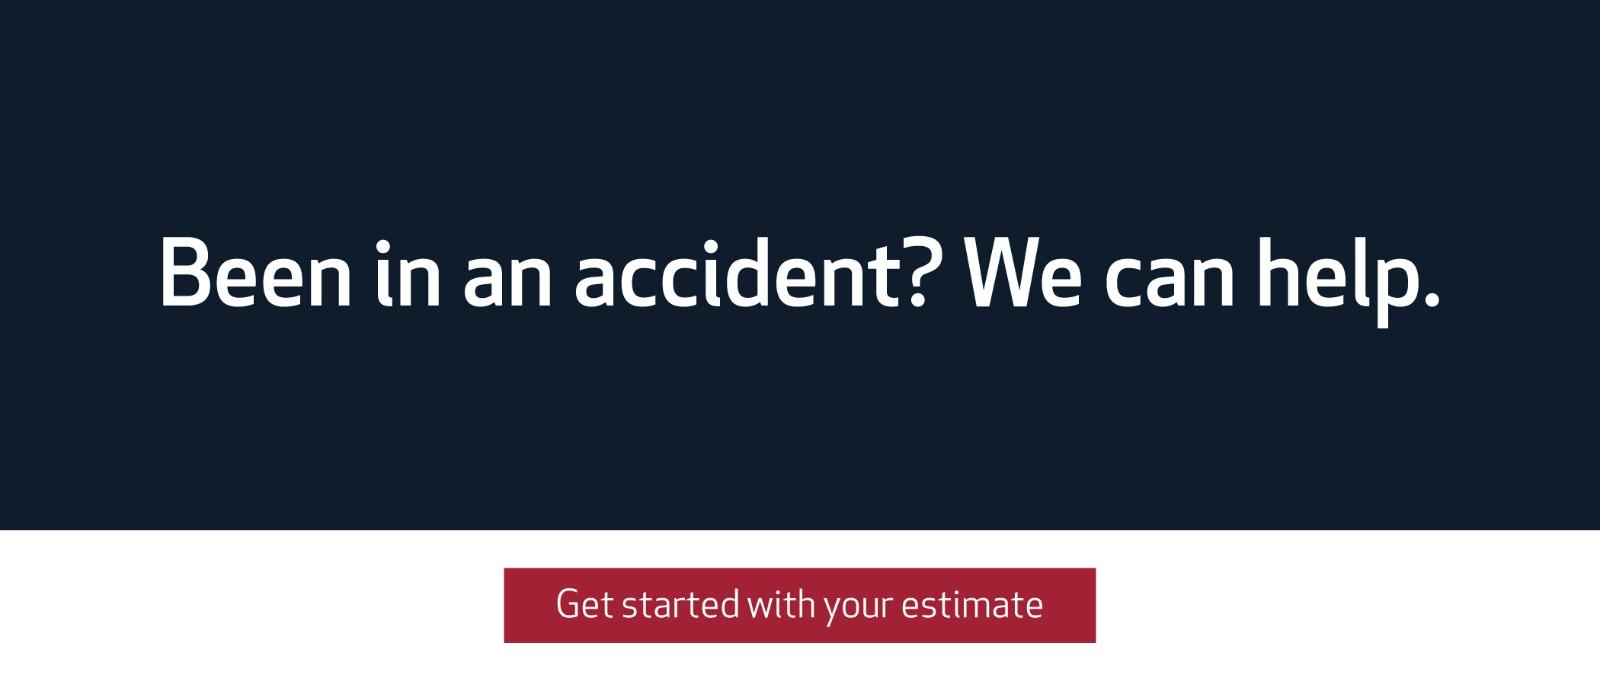 Been in an accident? we can help.